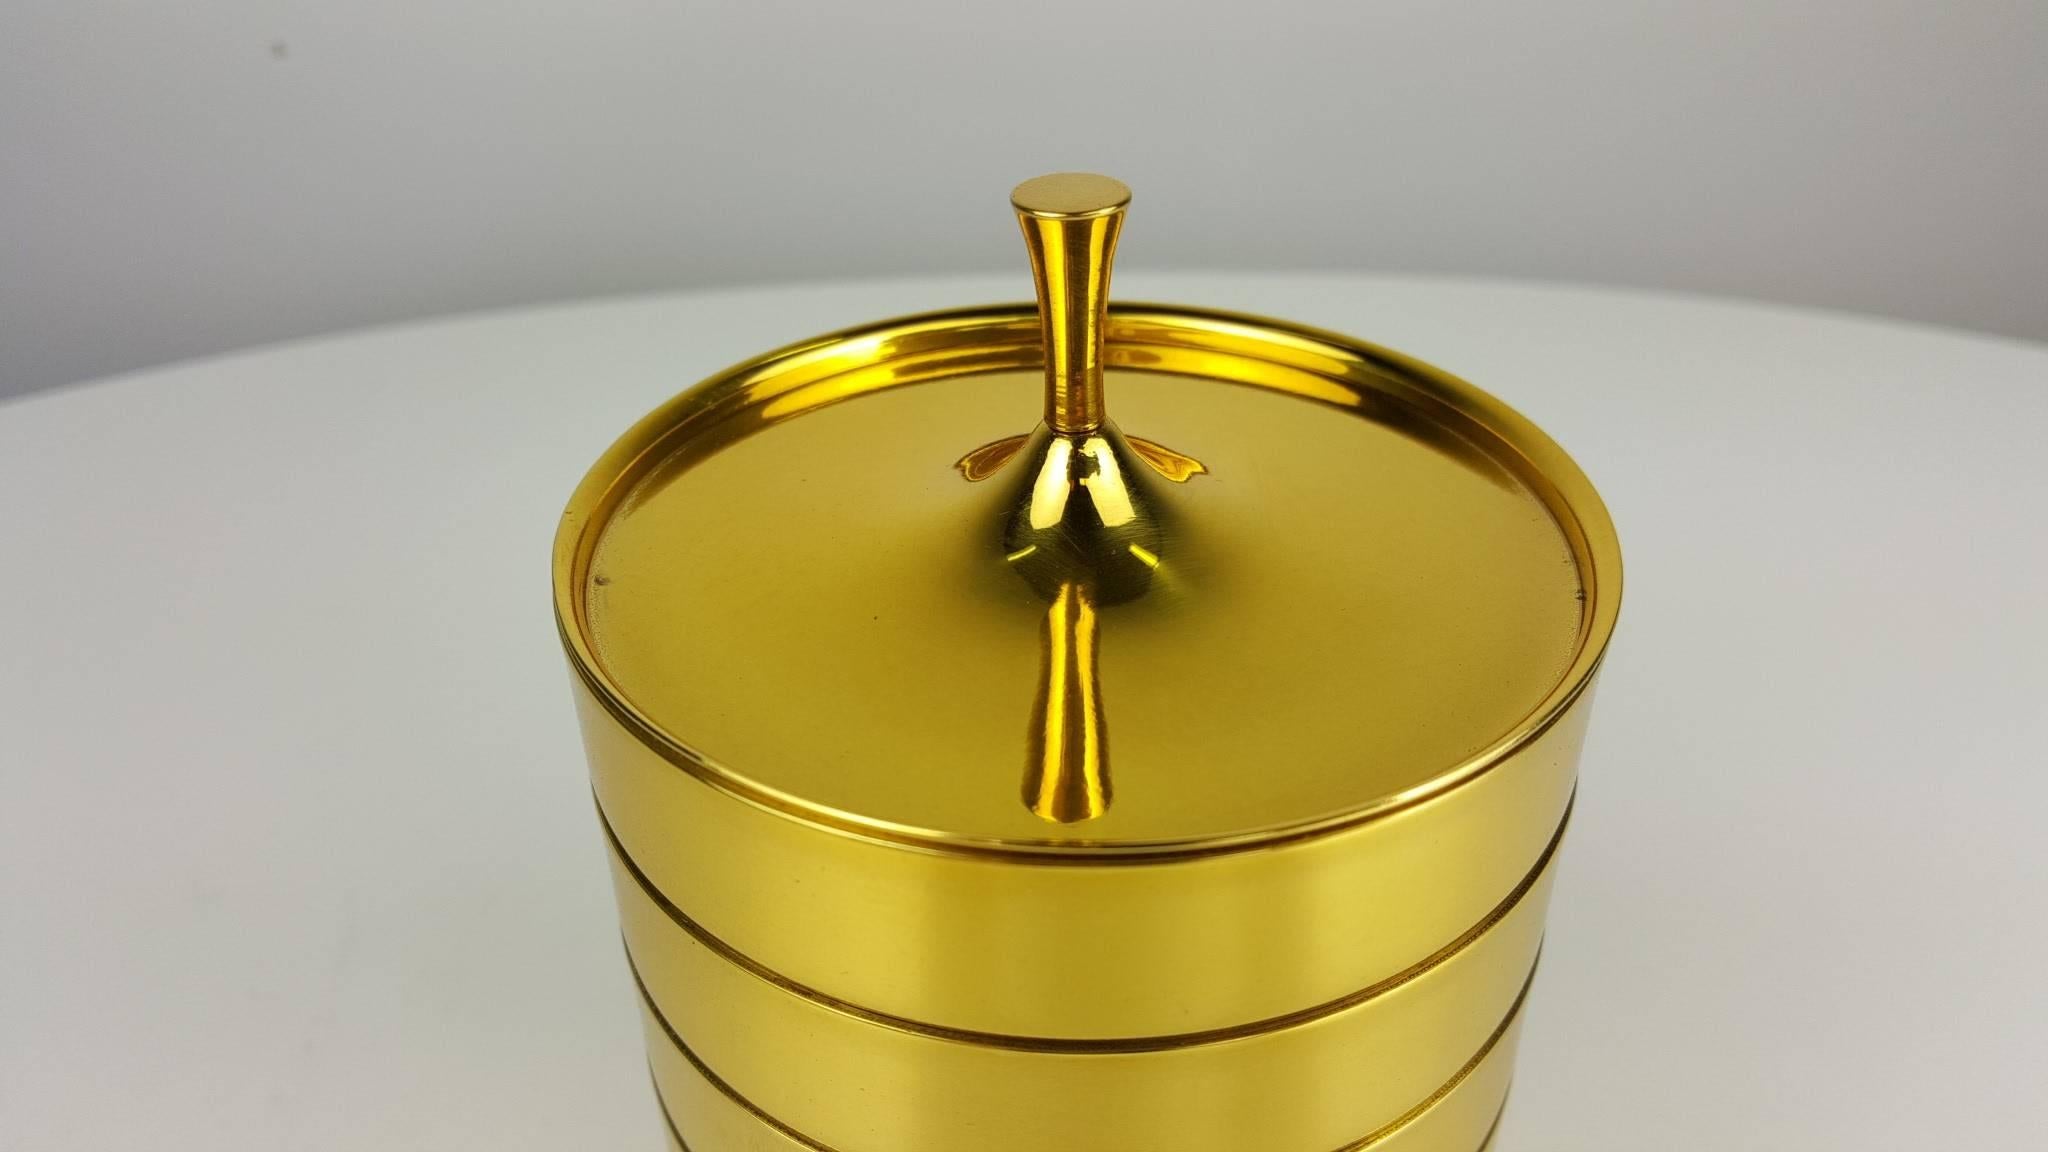 Rare set of brass drink coasters by Tommi Parzinger for Dorlyn, 1950s. The set consists of six stacking coasters with a decorative lid. These have been fully restored with a gold-toned brass finish. All pieces are stamped 